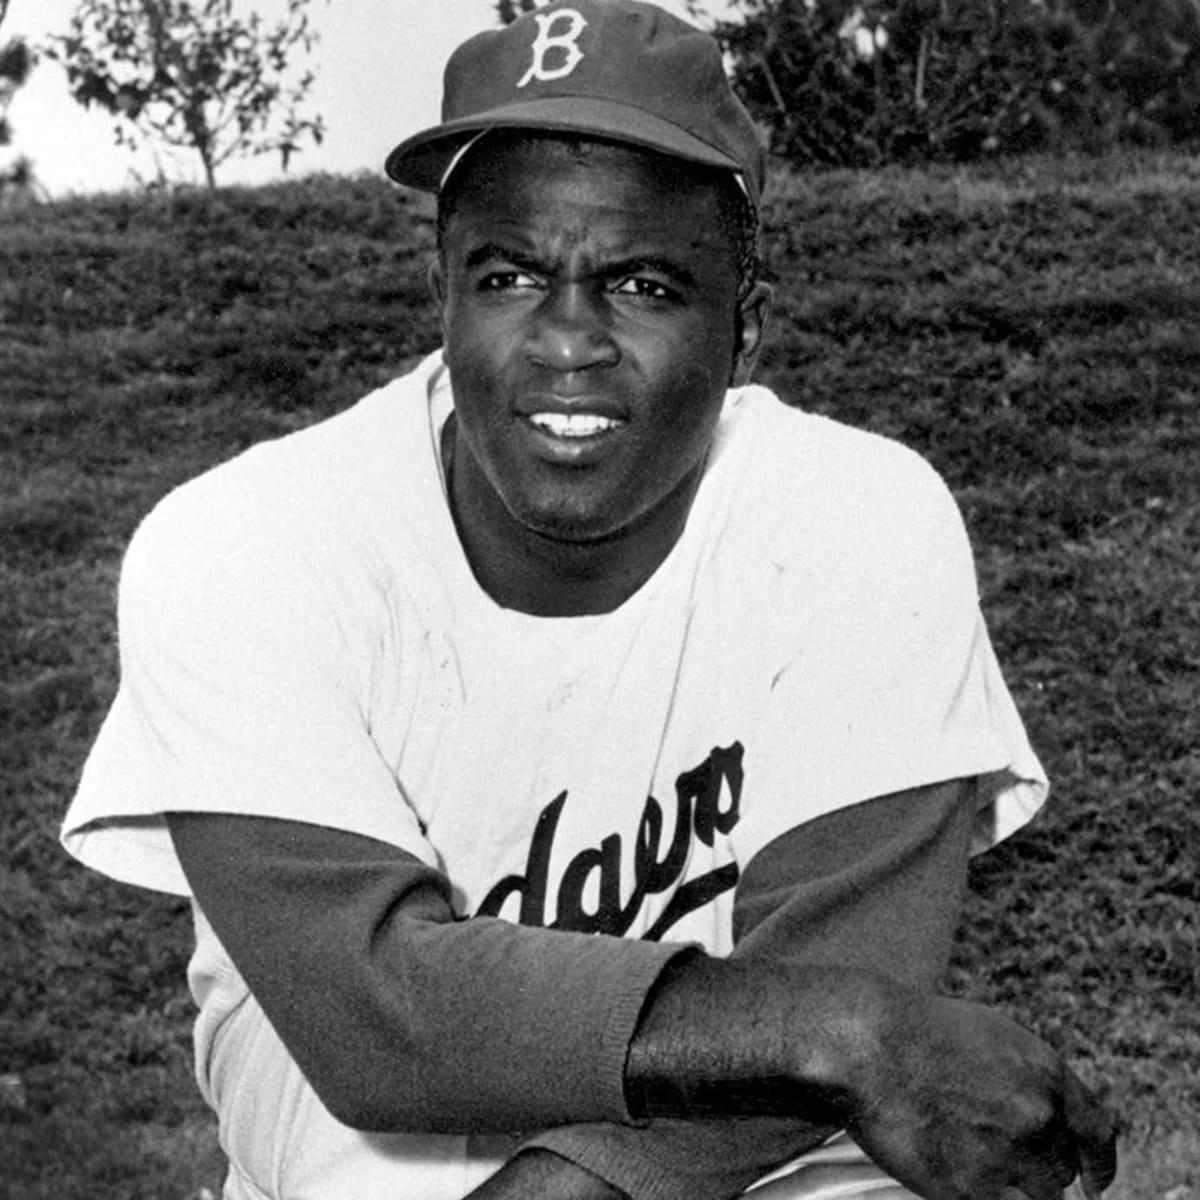 From SPORT magazine: A look inside the joy and loneliness of Jackie  Robinson's rookie season - ESPN